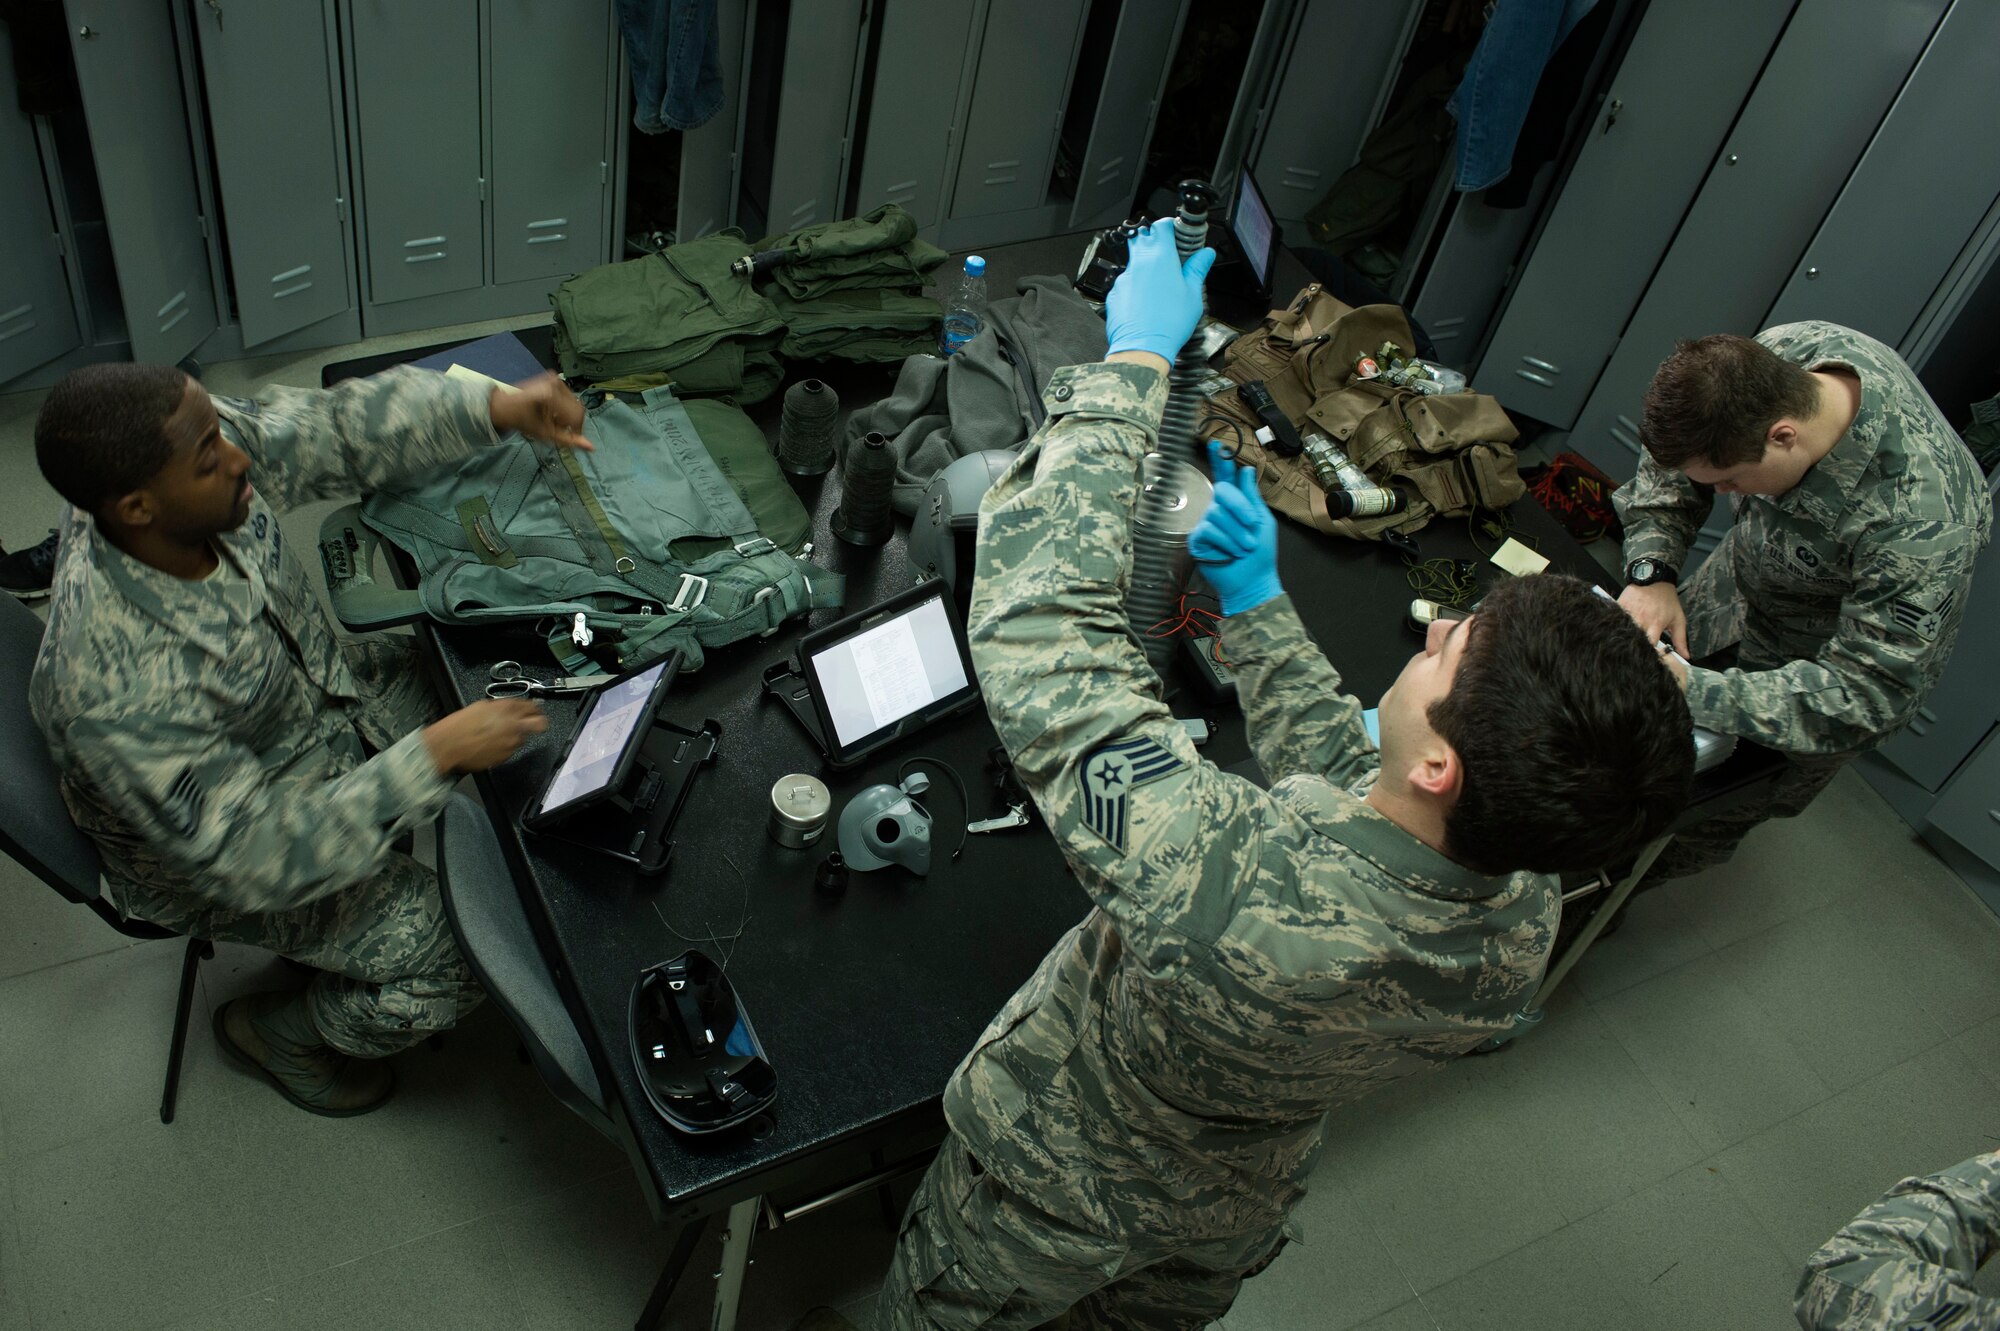 U.S. Air Force Tech. Sgt. Nathanial Robinson Jr., left, Staff Sgt. Kevin Ray, center, and Senior Airman Ian Sinchak, right, all 74th Expeditionary Fighter Squadron aircrew flight equipment technicians from the 23rd Operations Support Squadron at Moody Air Force Base, Ga., inspect, repair and prepare flight equipment during the 74th EFS’s deployment in support of Operation Atlantic Resolve at Graf Ignatievo, Bulgaria, March 16, 2016. The technicians ensure a full spectrum of survivability of air crew for in-flight, flight ejection and land survival scenarios. (U.S. Air Force photo by Staff Sgt. Joe W. McFadden/Released)